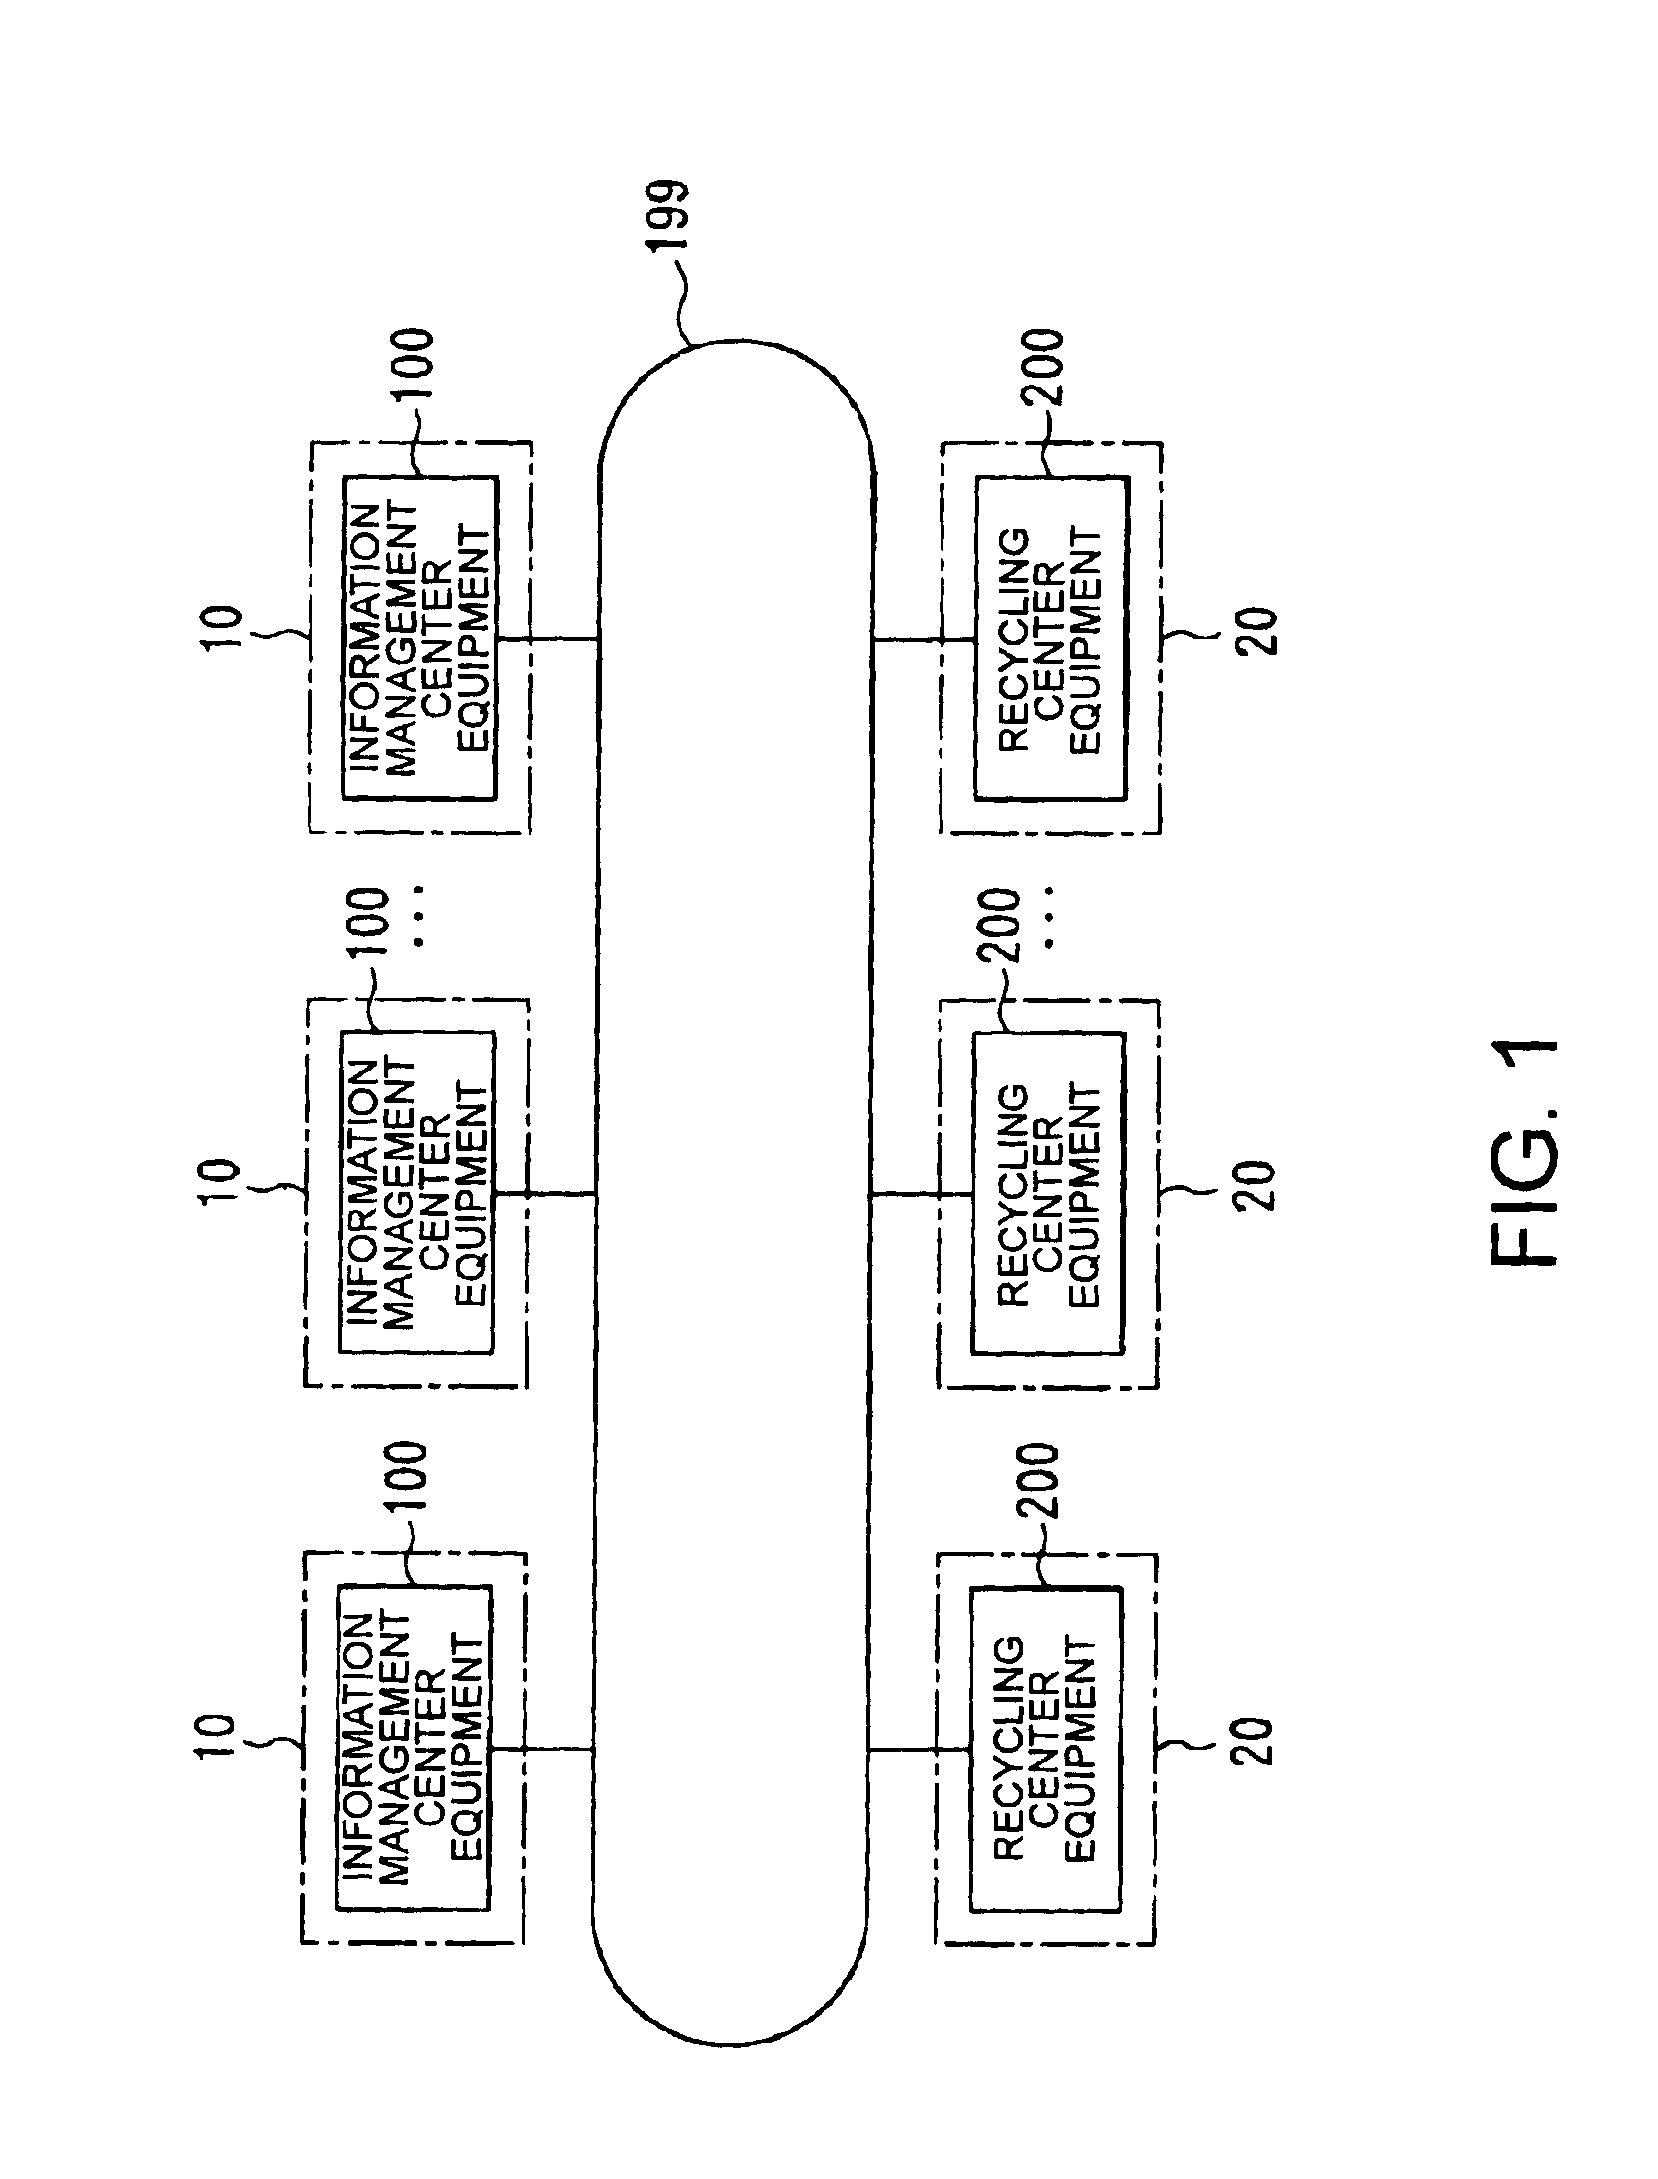 Recycling job supporting system, recycling center equipment, information management center equipment, equipment program, and recycling job supporting method